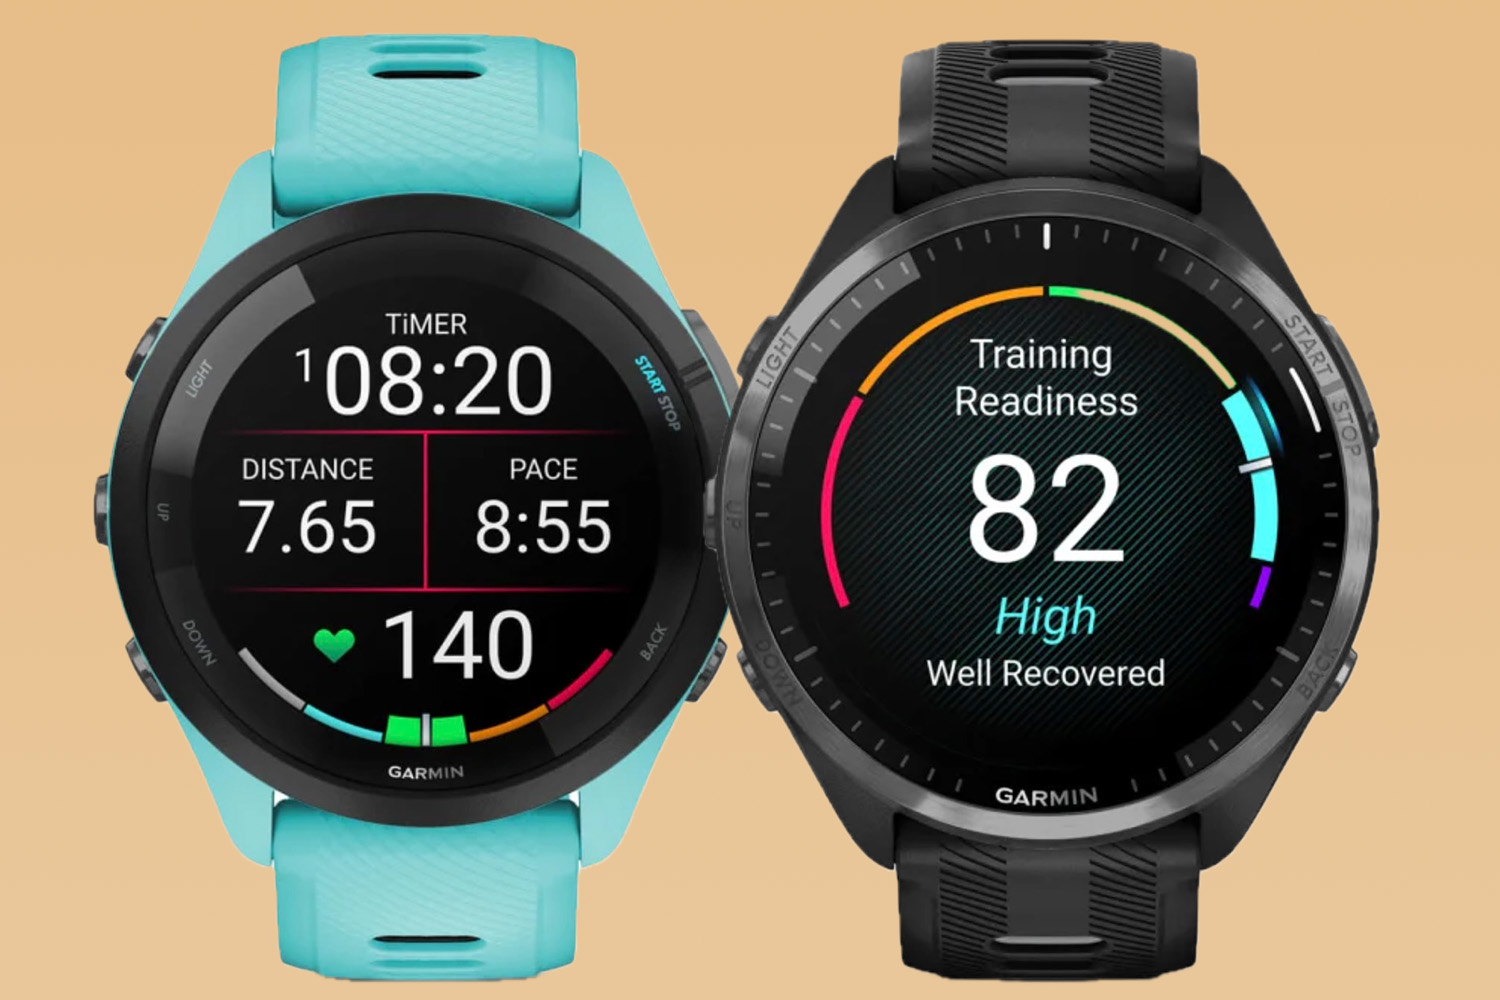 Garmin Adds AMOLED Displays to Forerunner 265 and 965